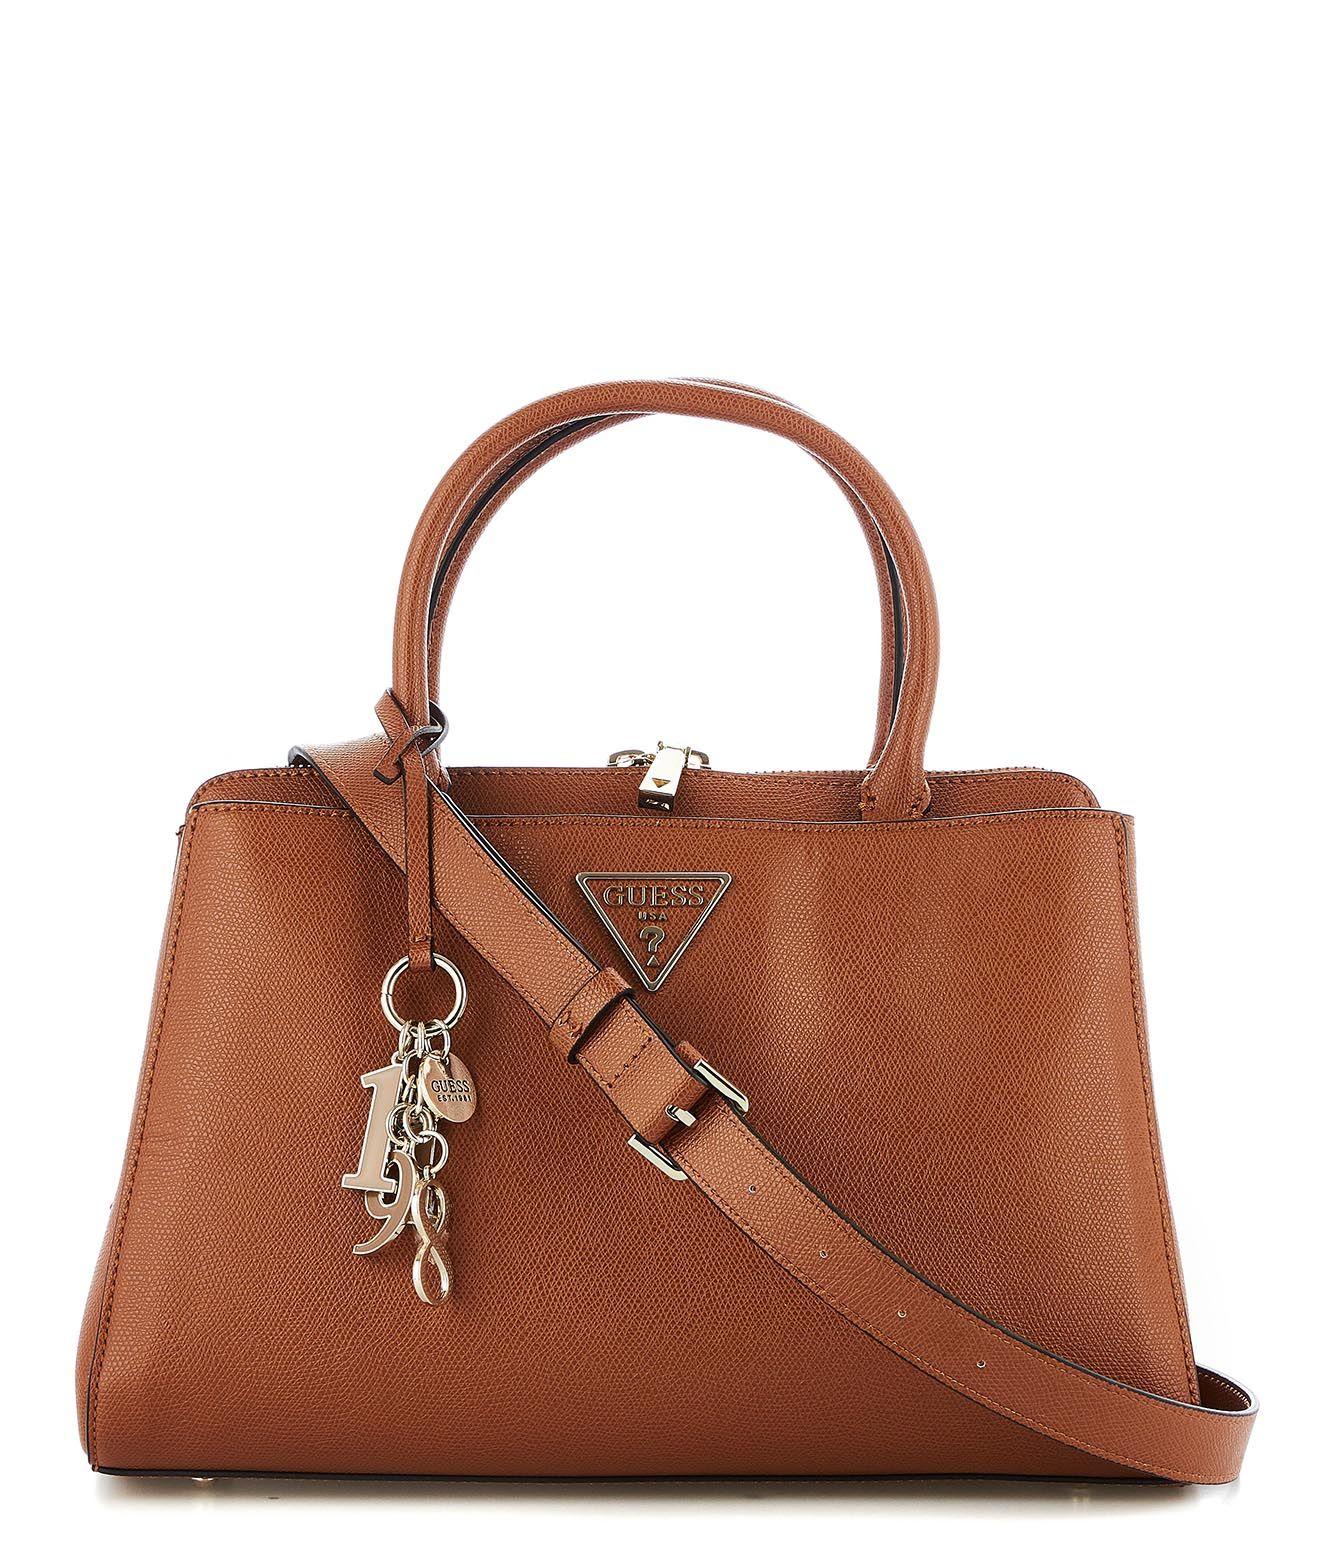 Guess Brown Leather Handbag in Brown - Lyst